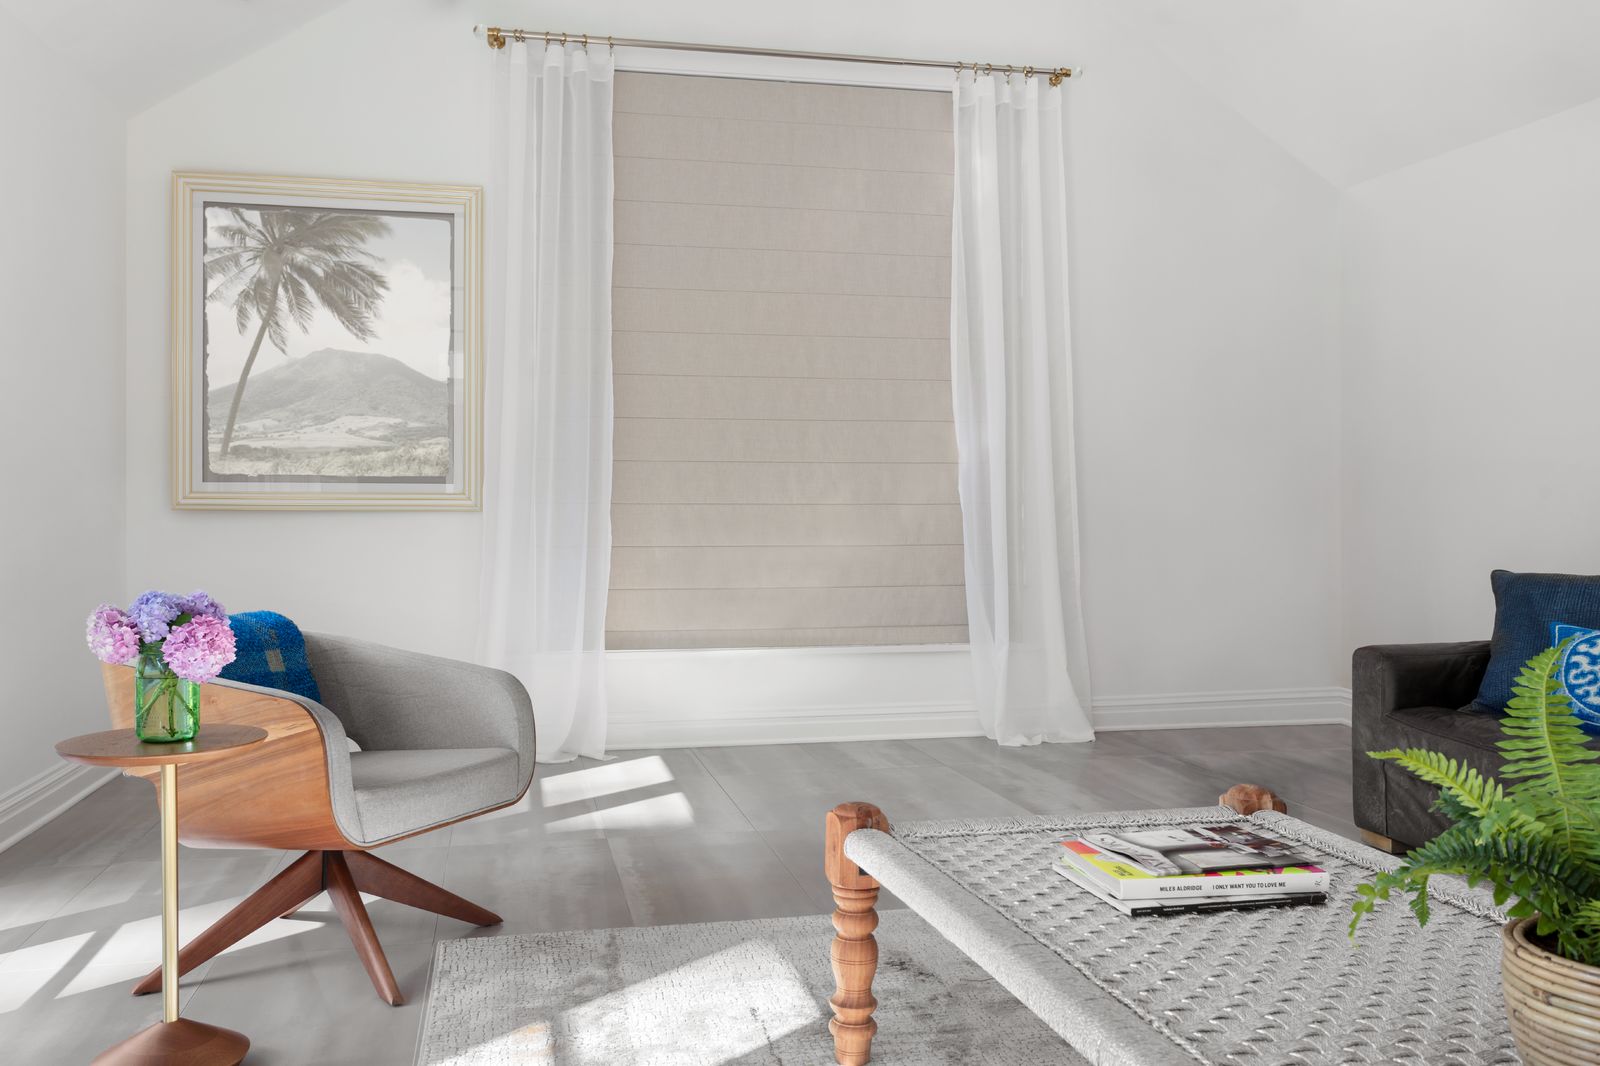 A tan roman shade is paired with sheer drapes in a living room with a modern beach vibe.